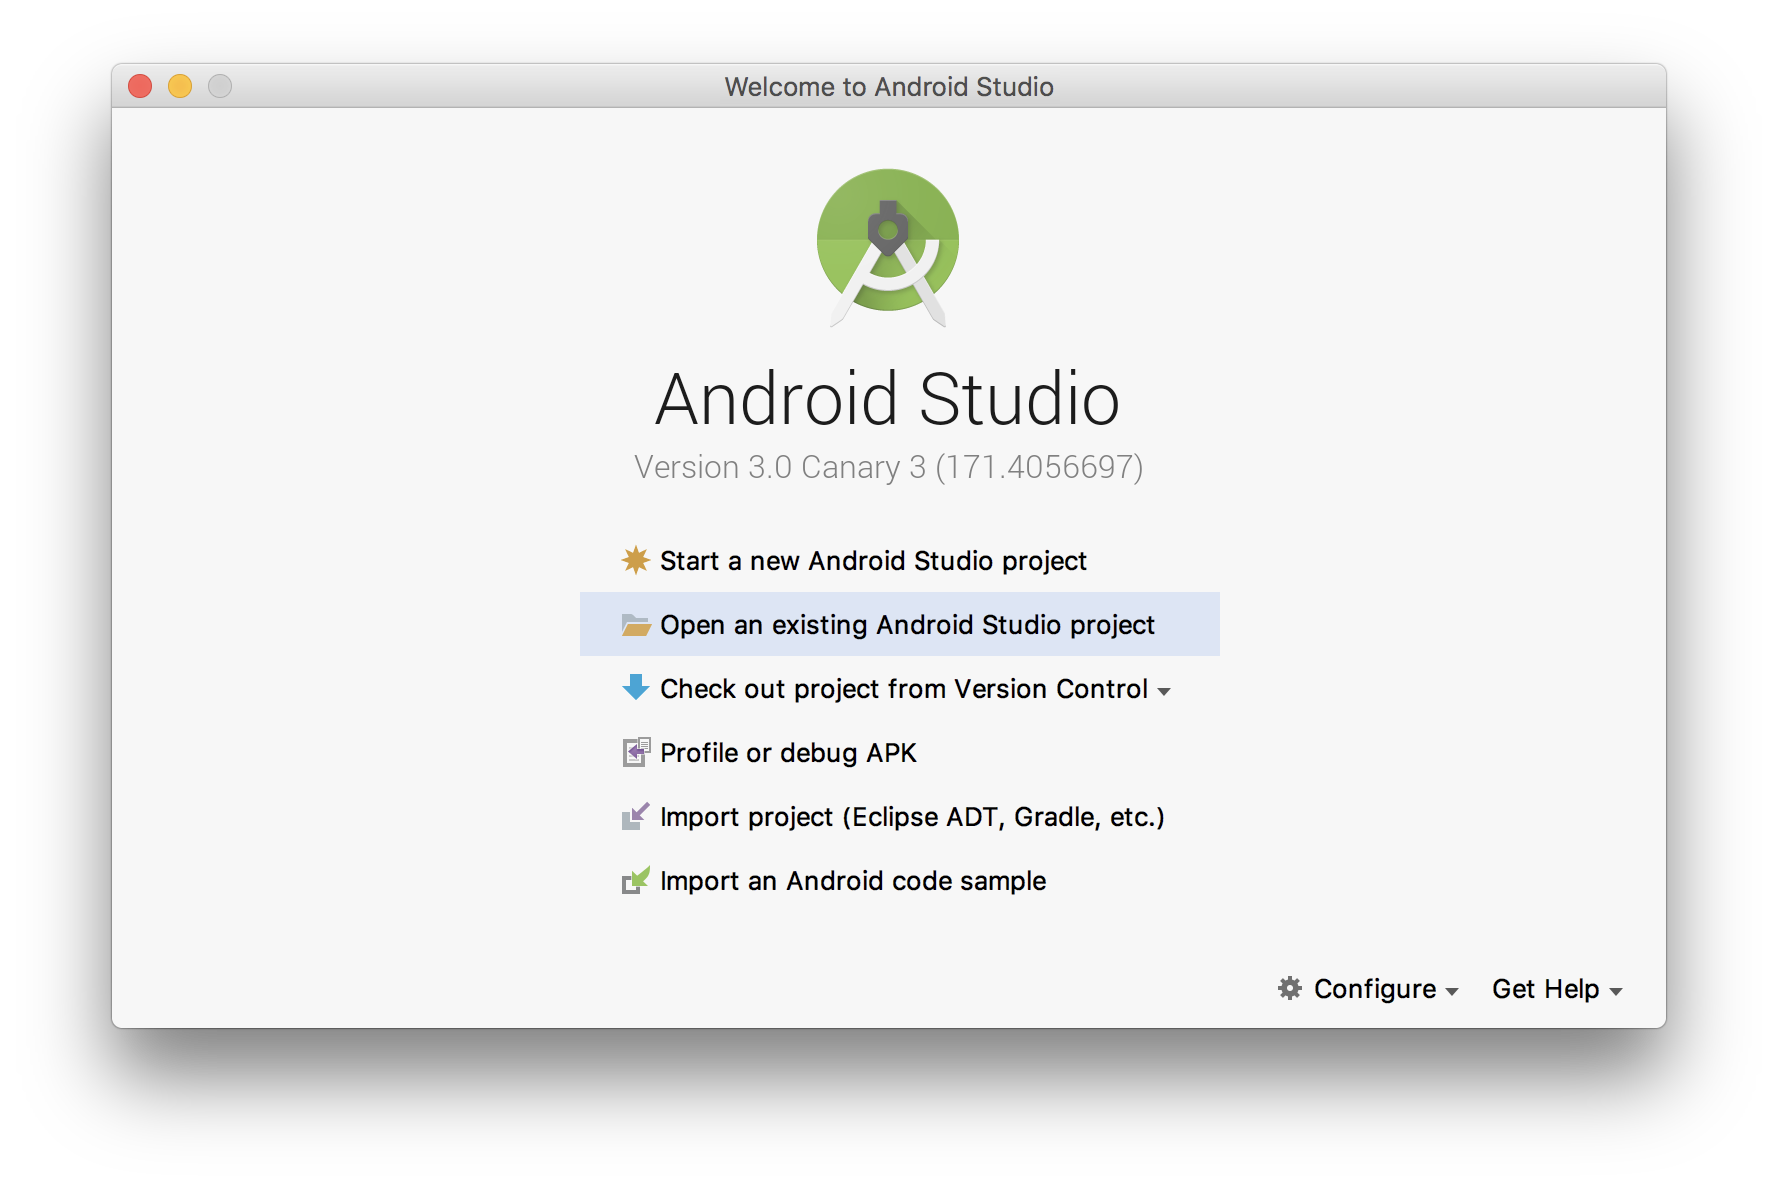 Open an existing Android Studio project